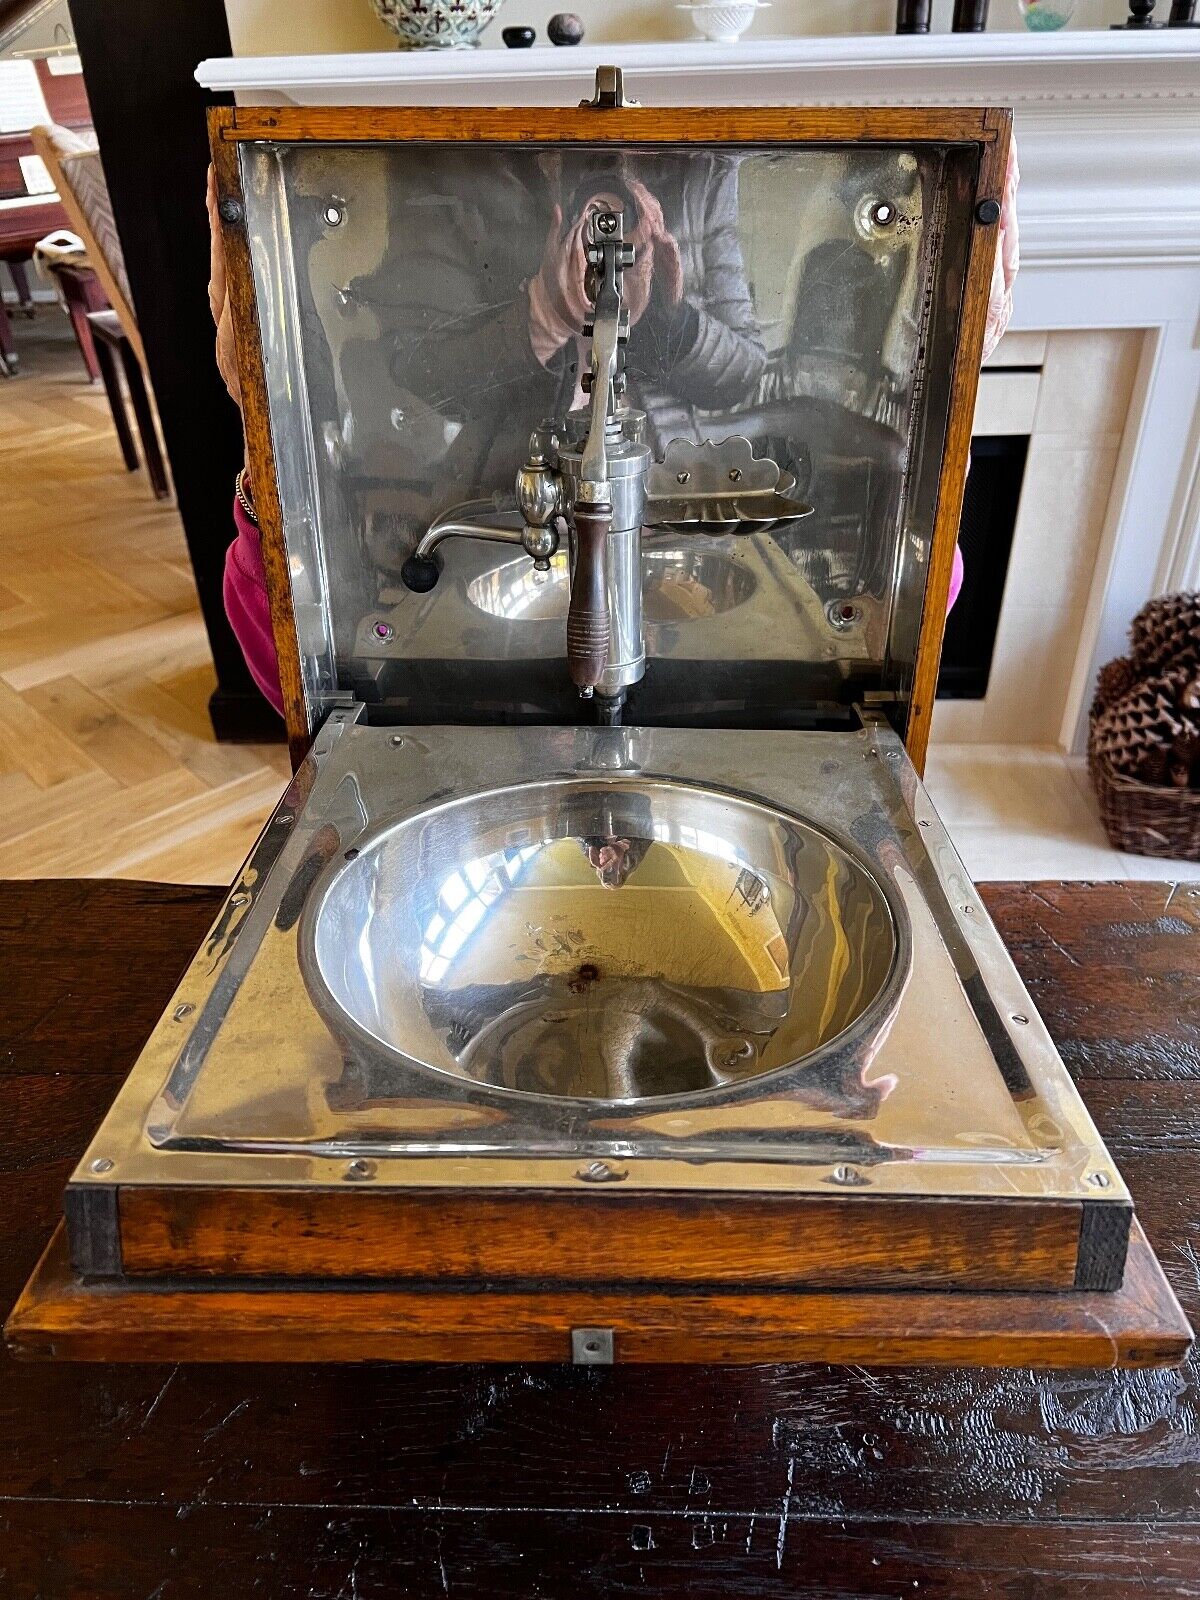 Stunning Rare Antique A.B. Sands & Co. 1915 Fold Out Boat Sink